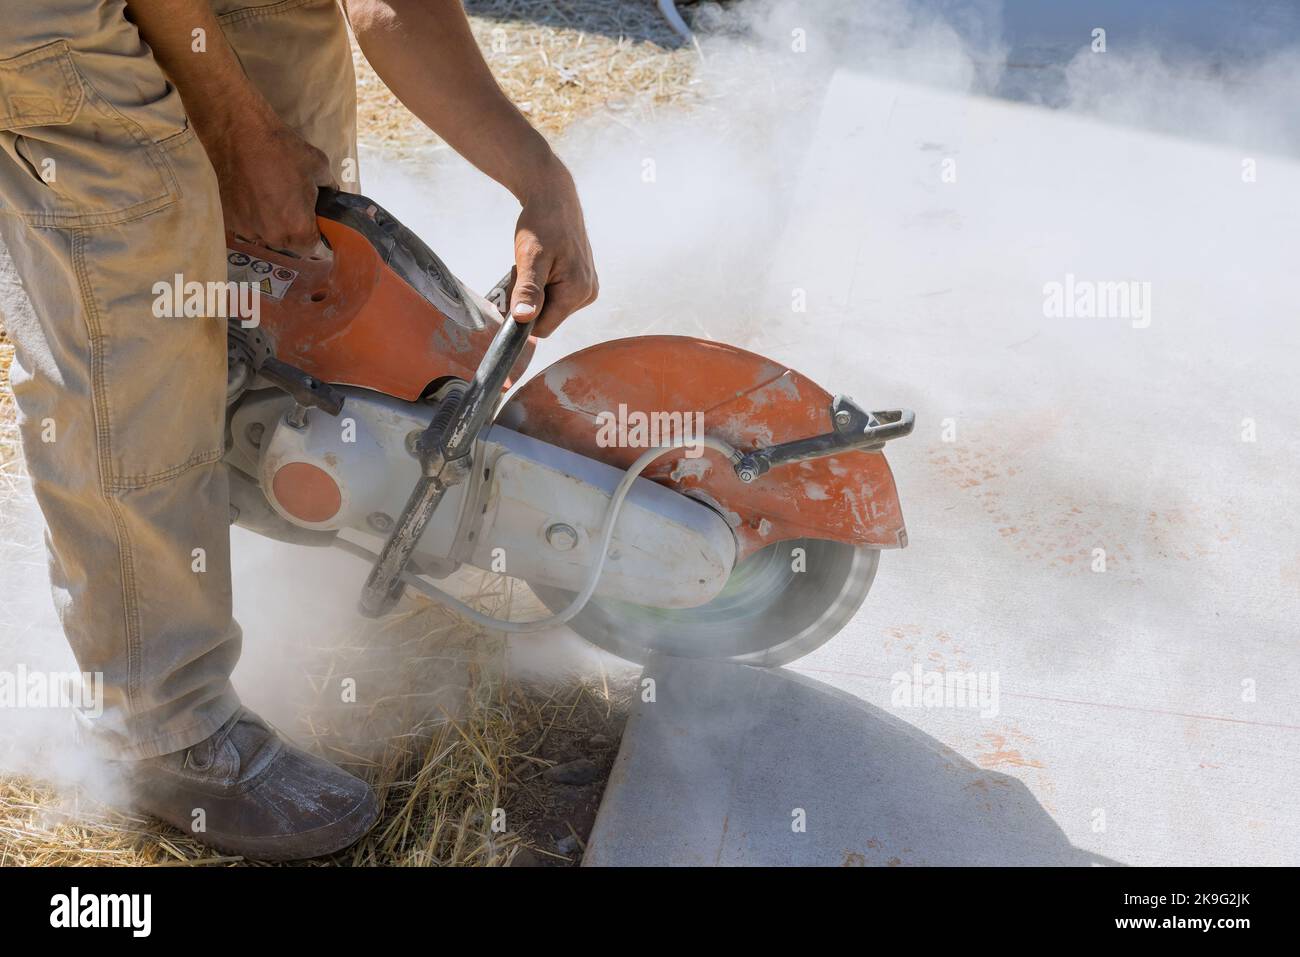 Construction worker cutting concrete paving stabs for sidewalk using cut off diamond bladed saw. Stock Photo